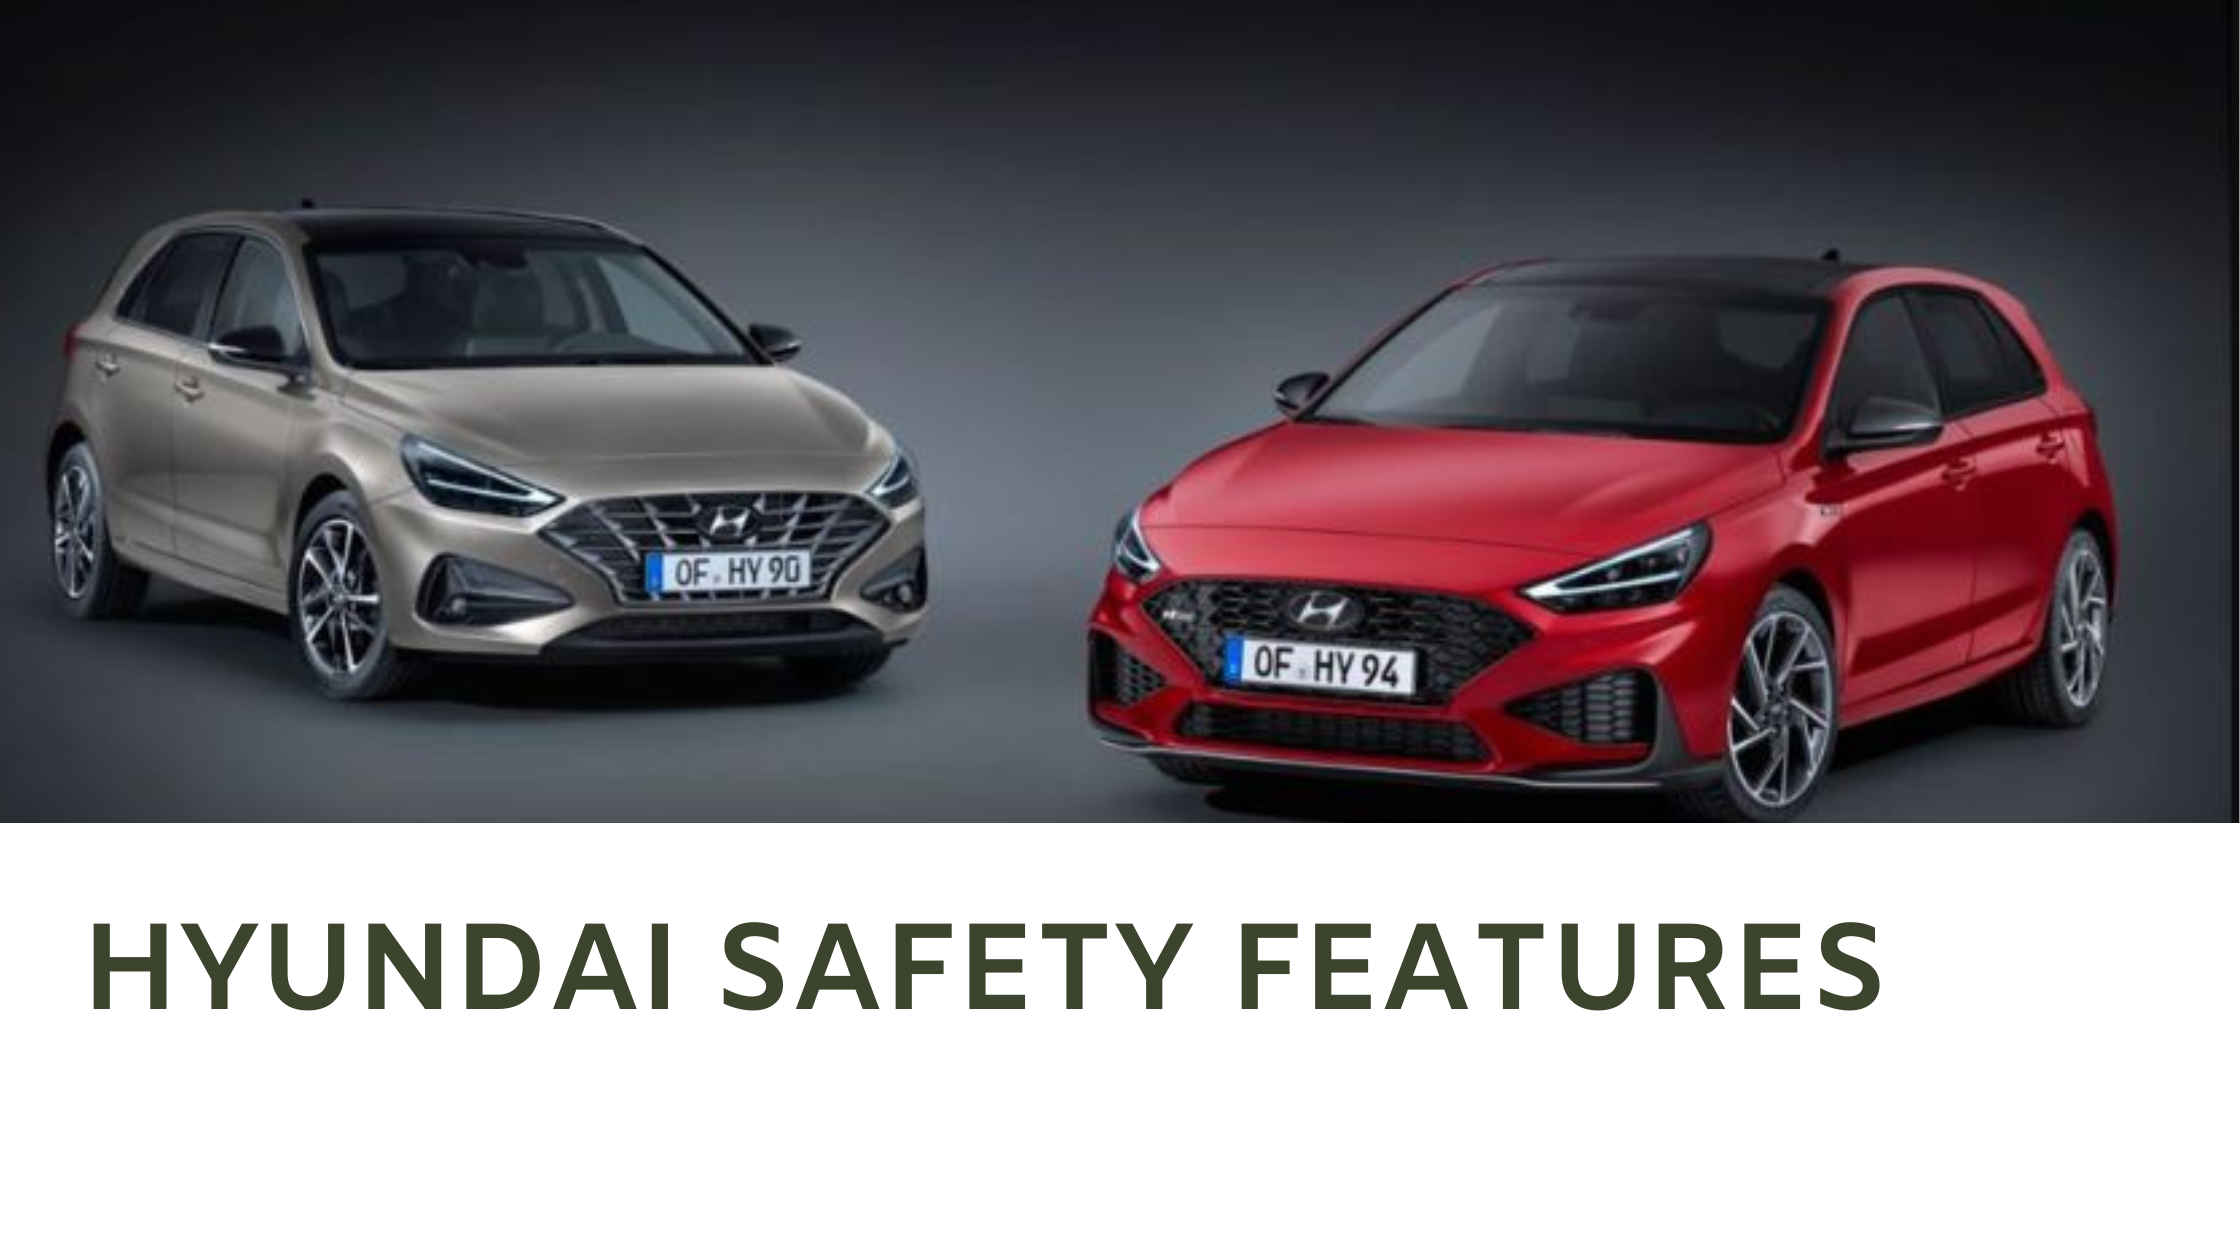 Hyundai Safety Features